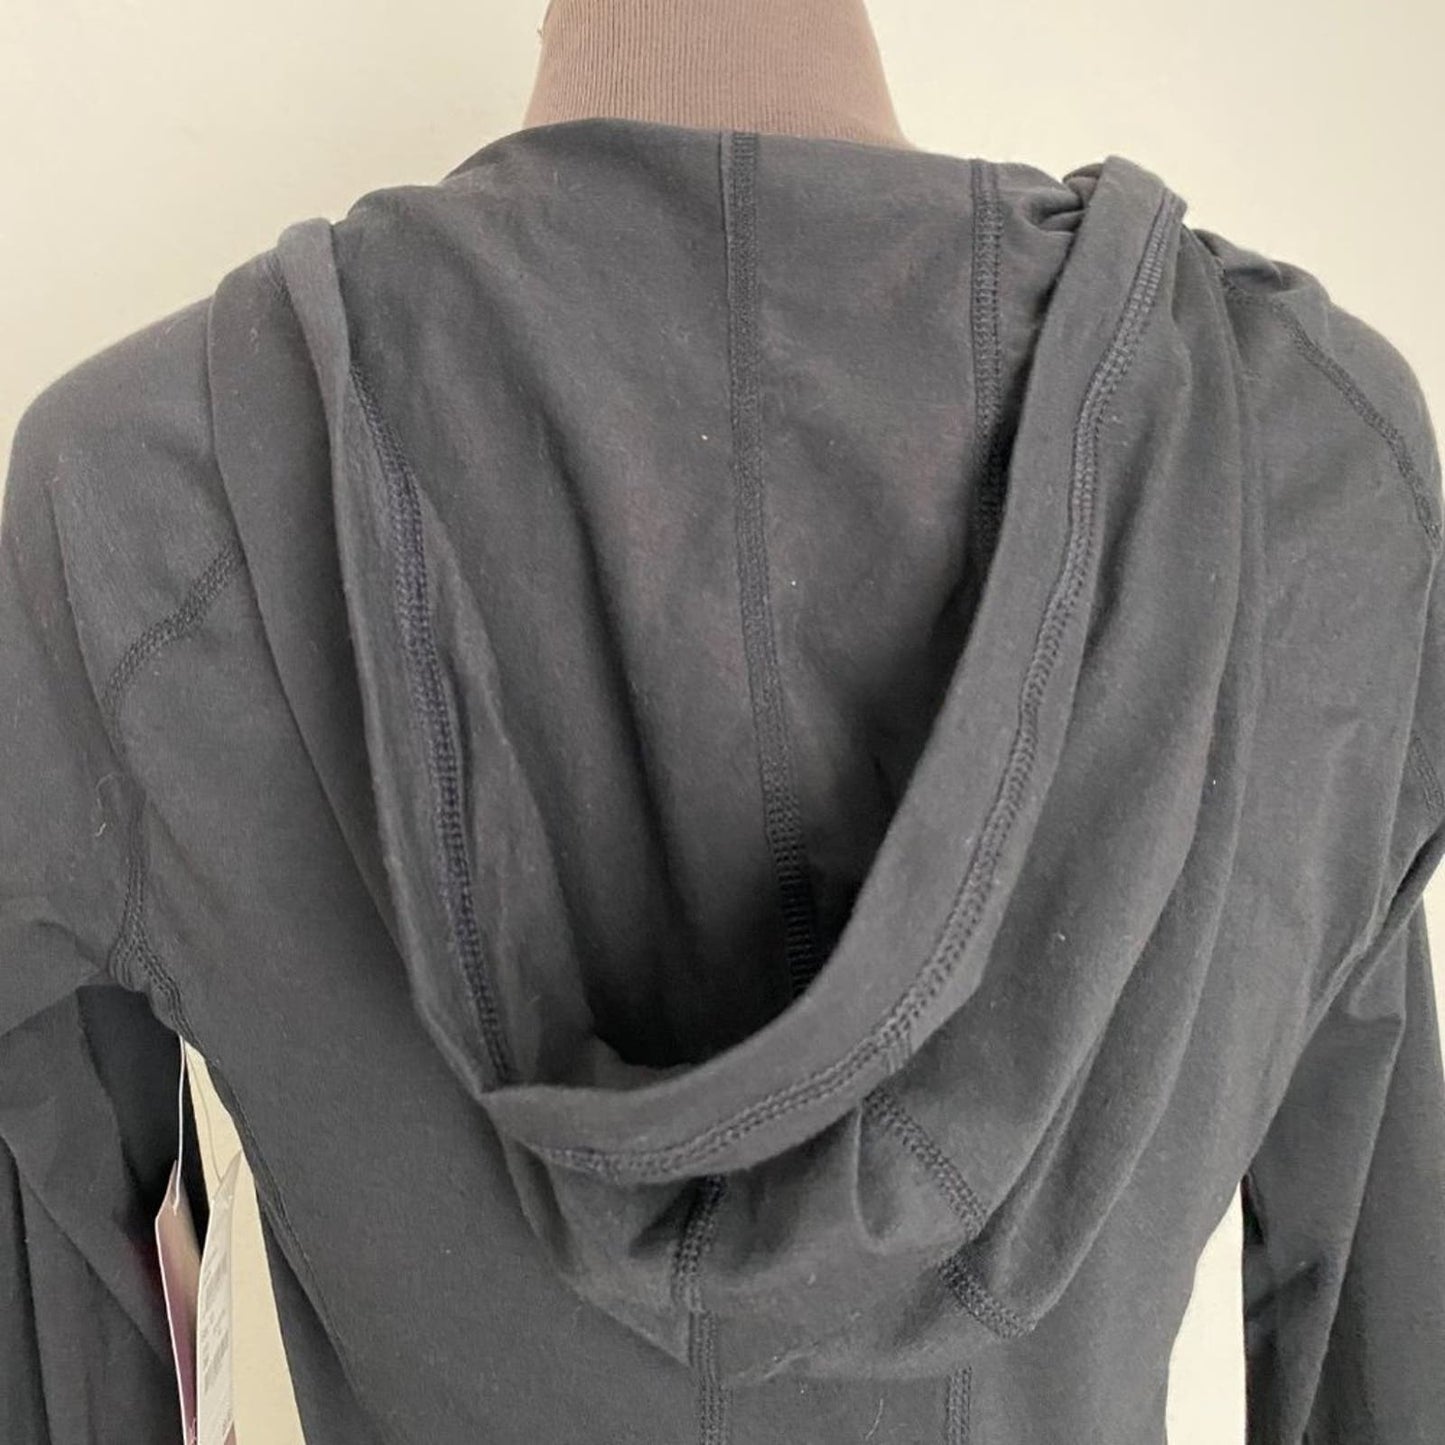 Zella sz XS  hooded scoop neck work out top shirt NWT